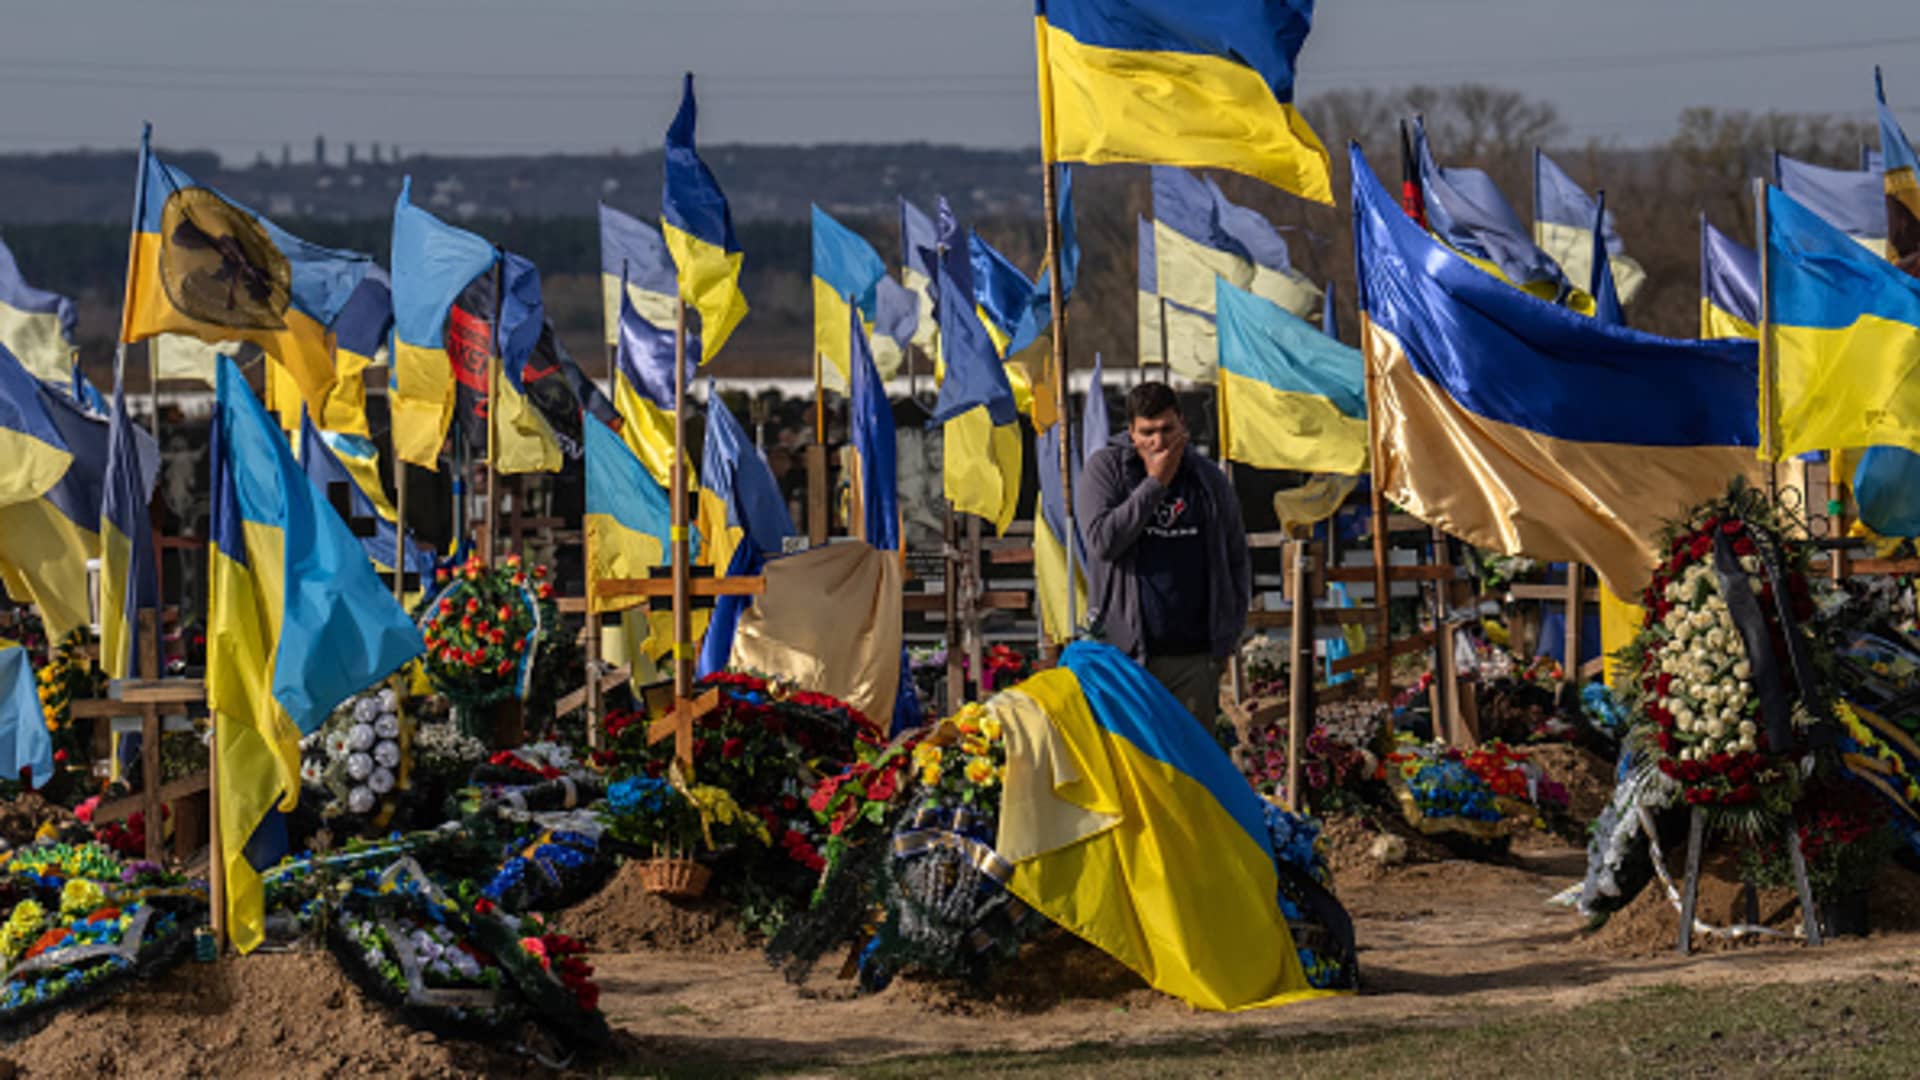 A man pauses by a grave as Ukrainian flags fly in a cemetery for soldiers killed in action following the Russian invasion earlier this year, on October 19, 2022 in Kharkiv, Ukraine. Russia's president Vladimir